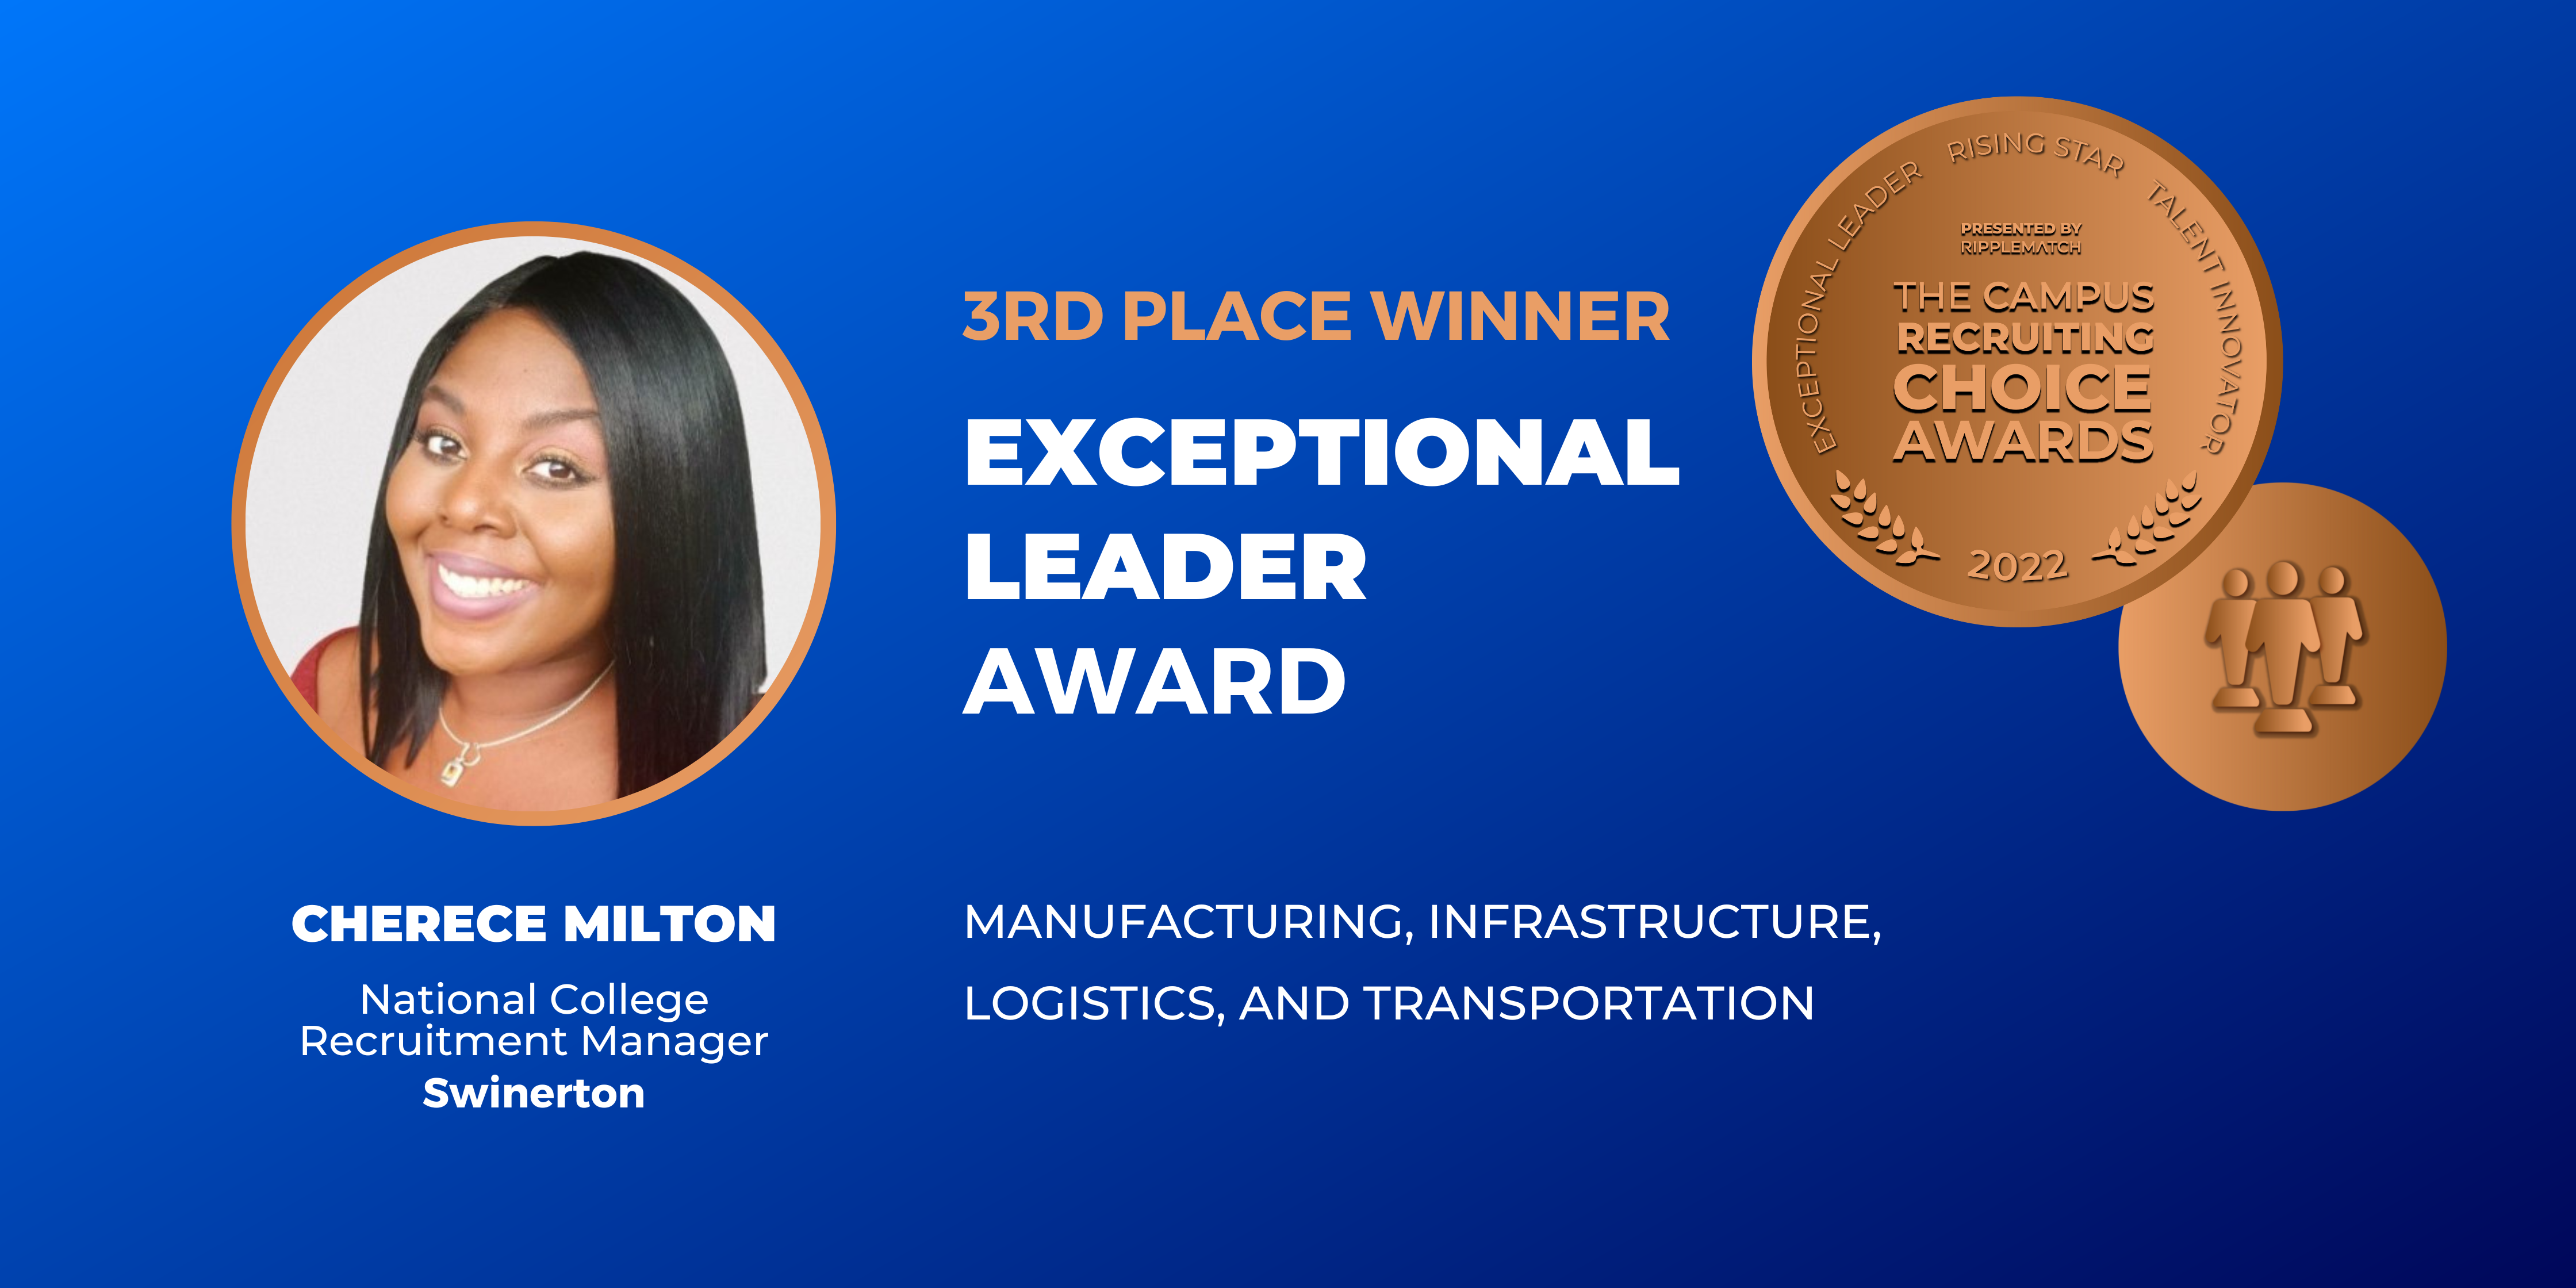 EXCEPTIONAL LEADER - 3rd place - Manufacturing, Infrastructure, Logistics, and Transportation - Cherece Milton